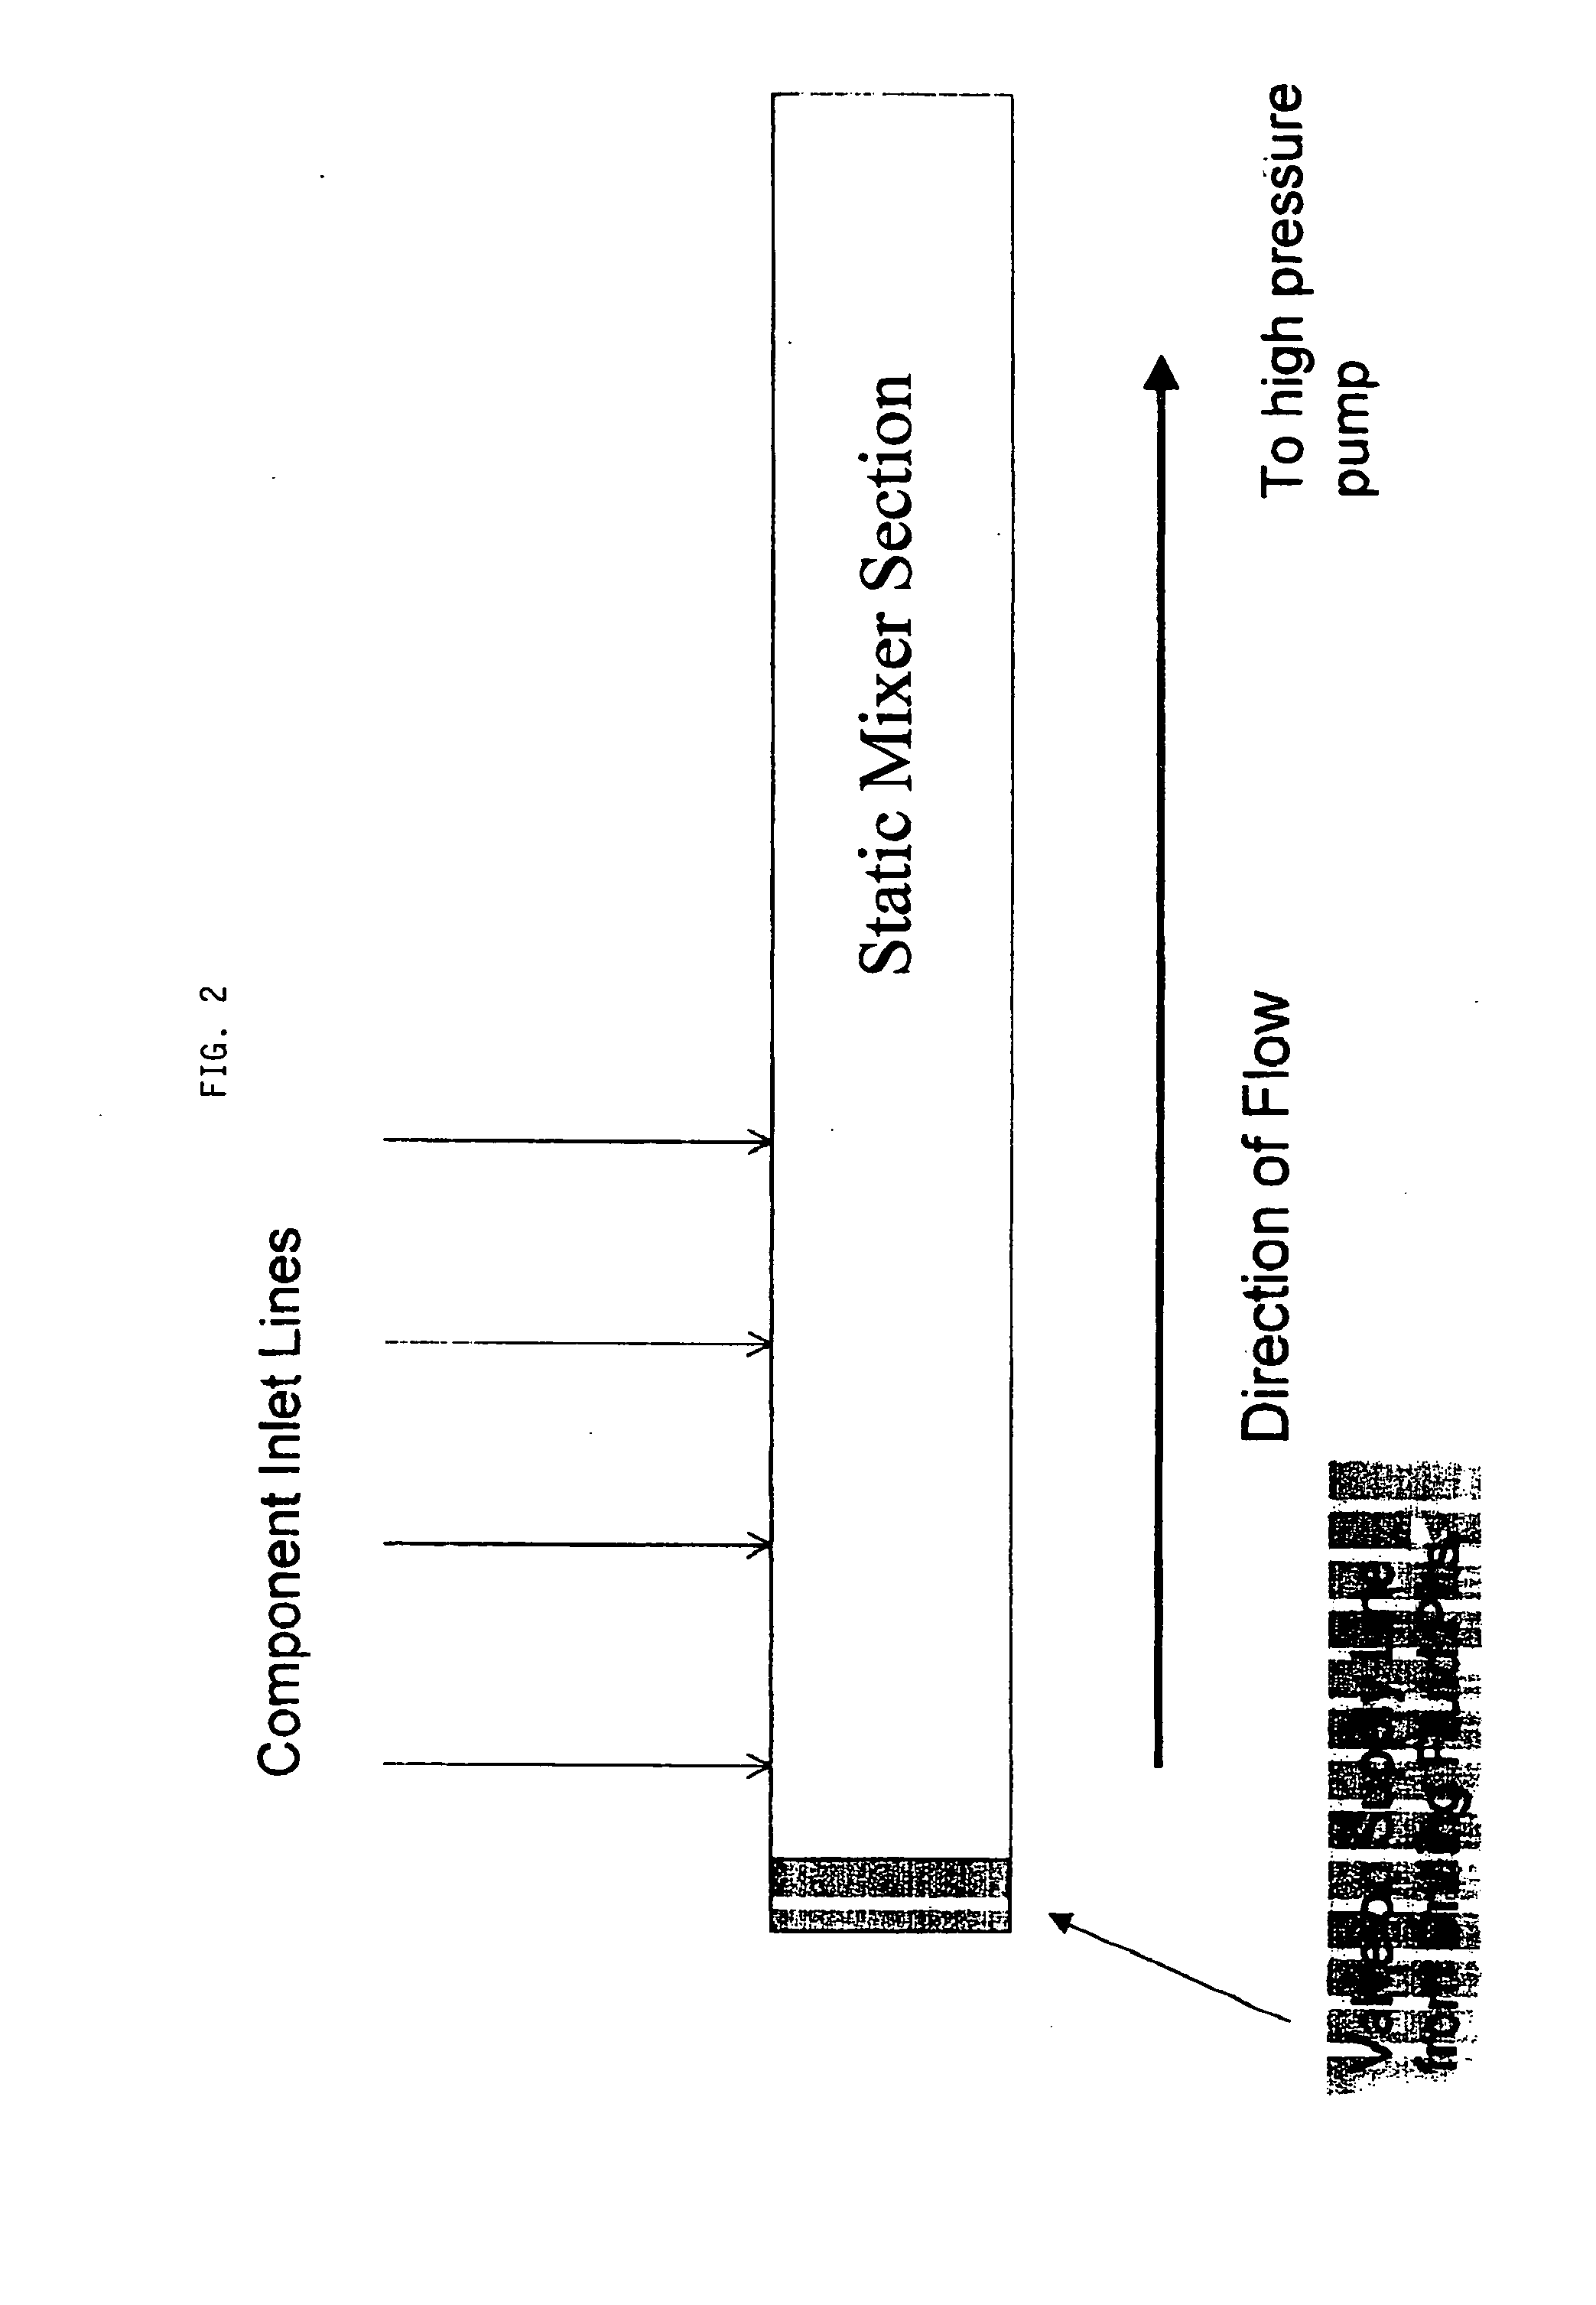 Method and apparatus for performing chemical treatments of exposed geological formations